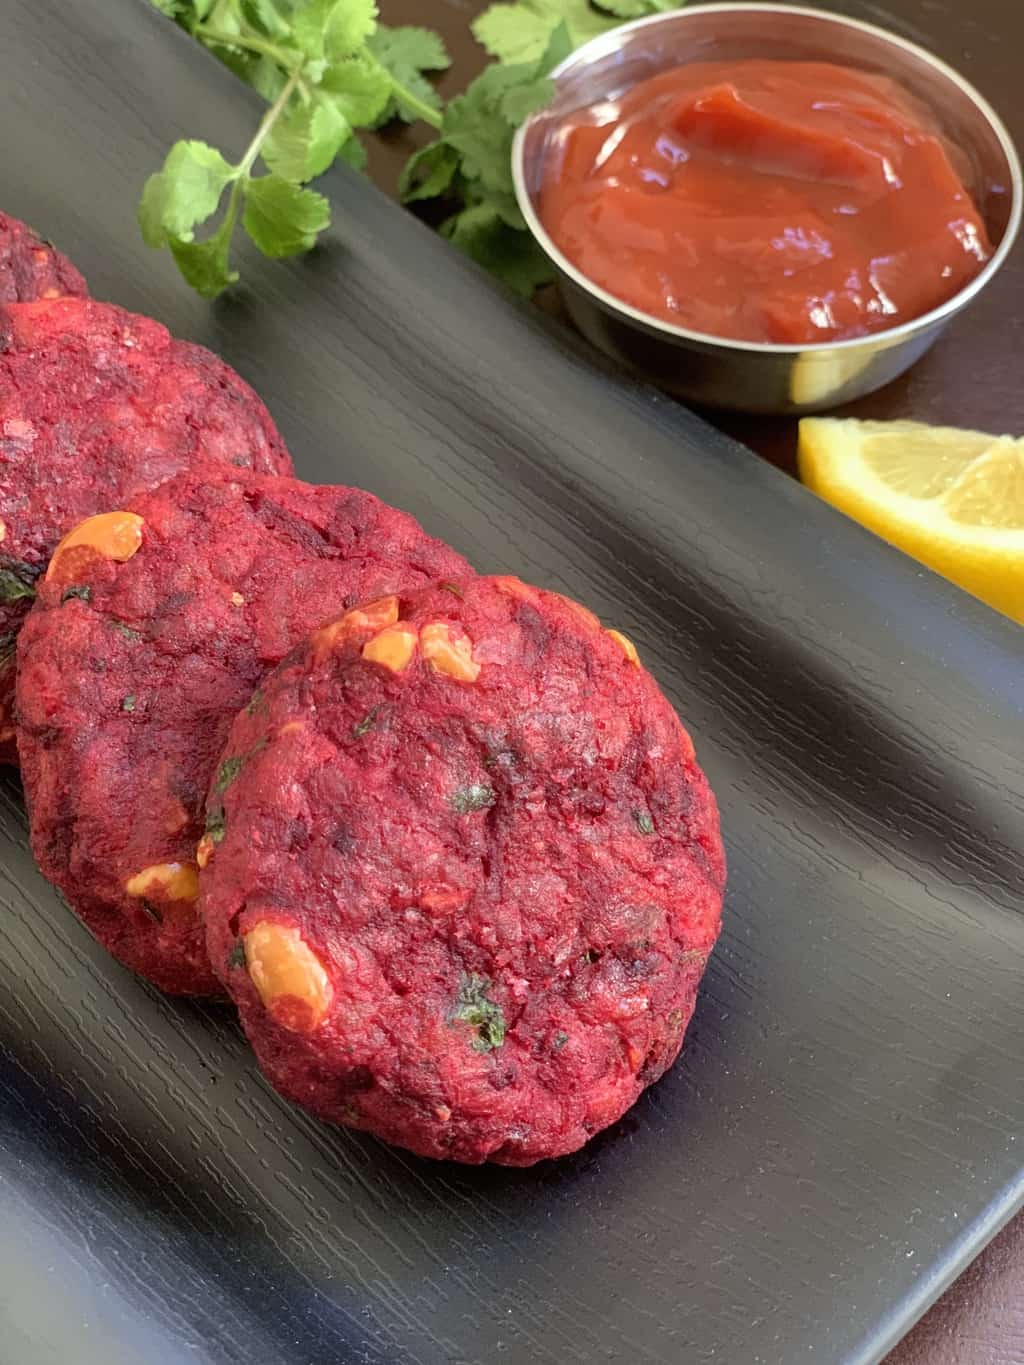 beetroot cutlet served on a tray with ketchup on the side